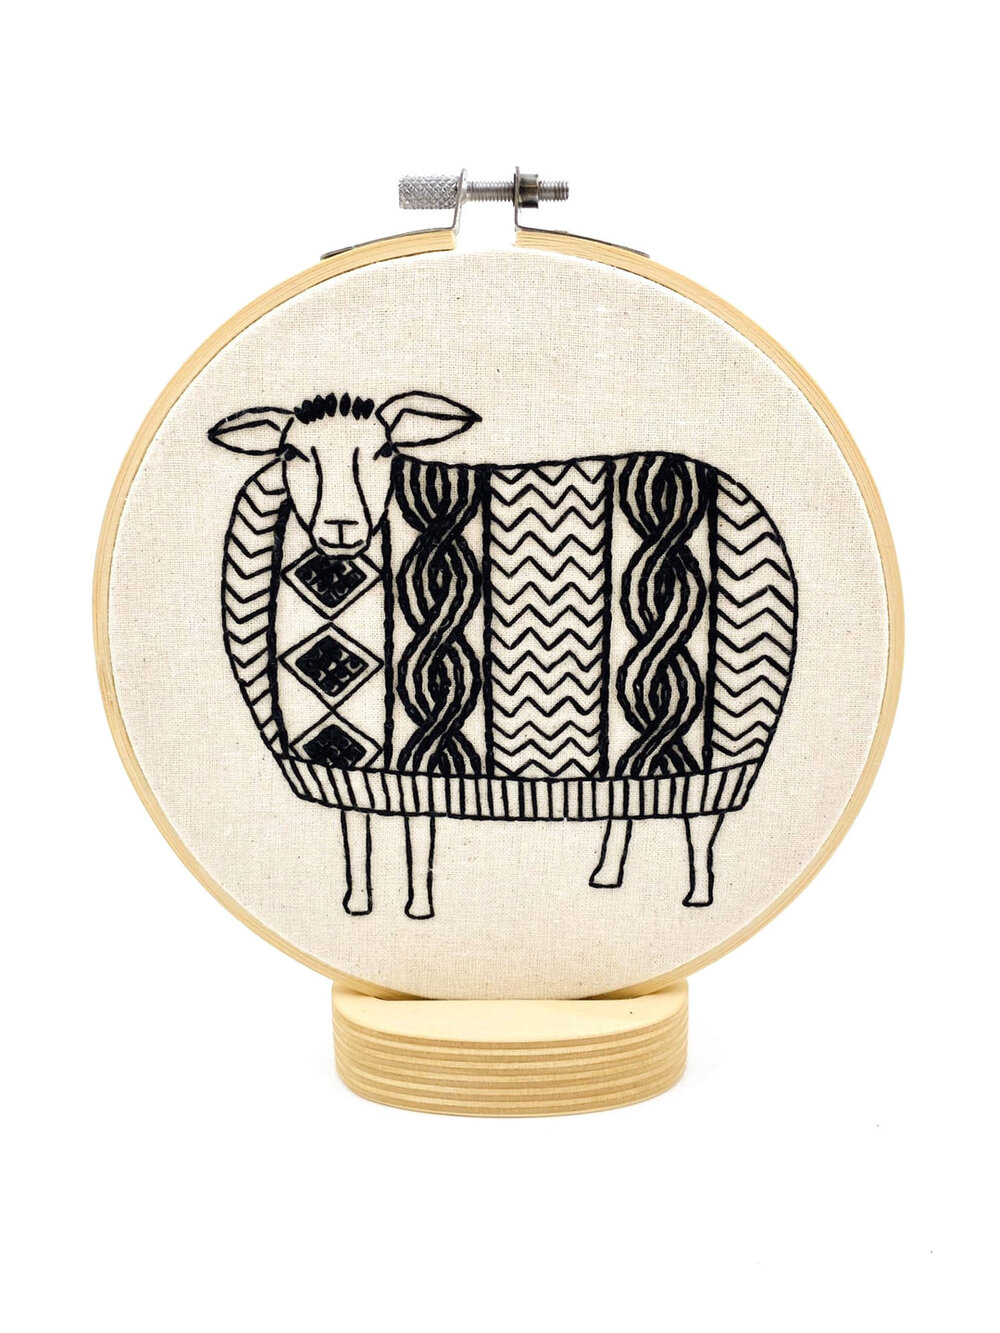 Sheep Embroidery Kit — Judith & Lily